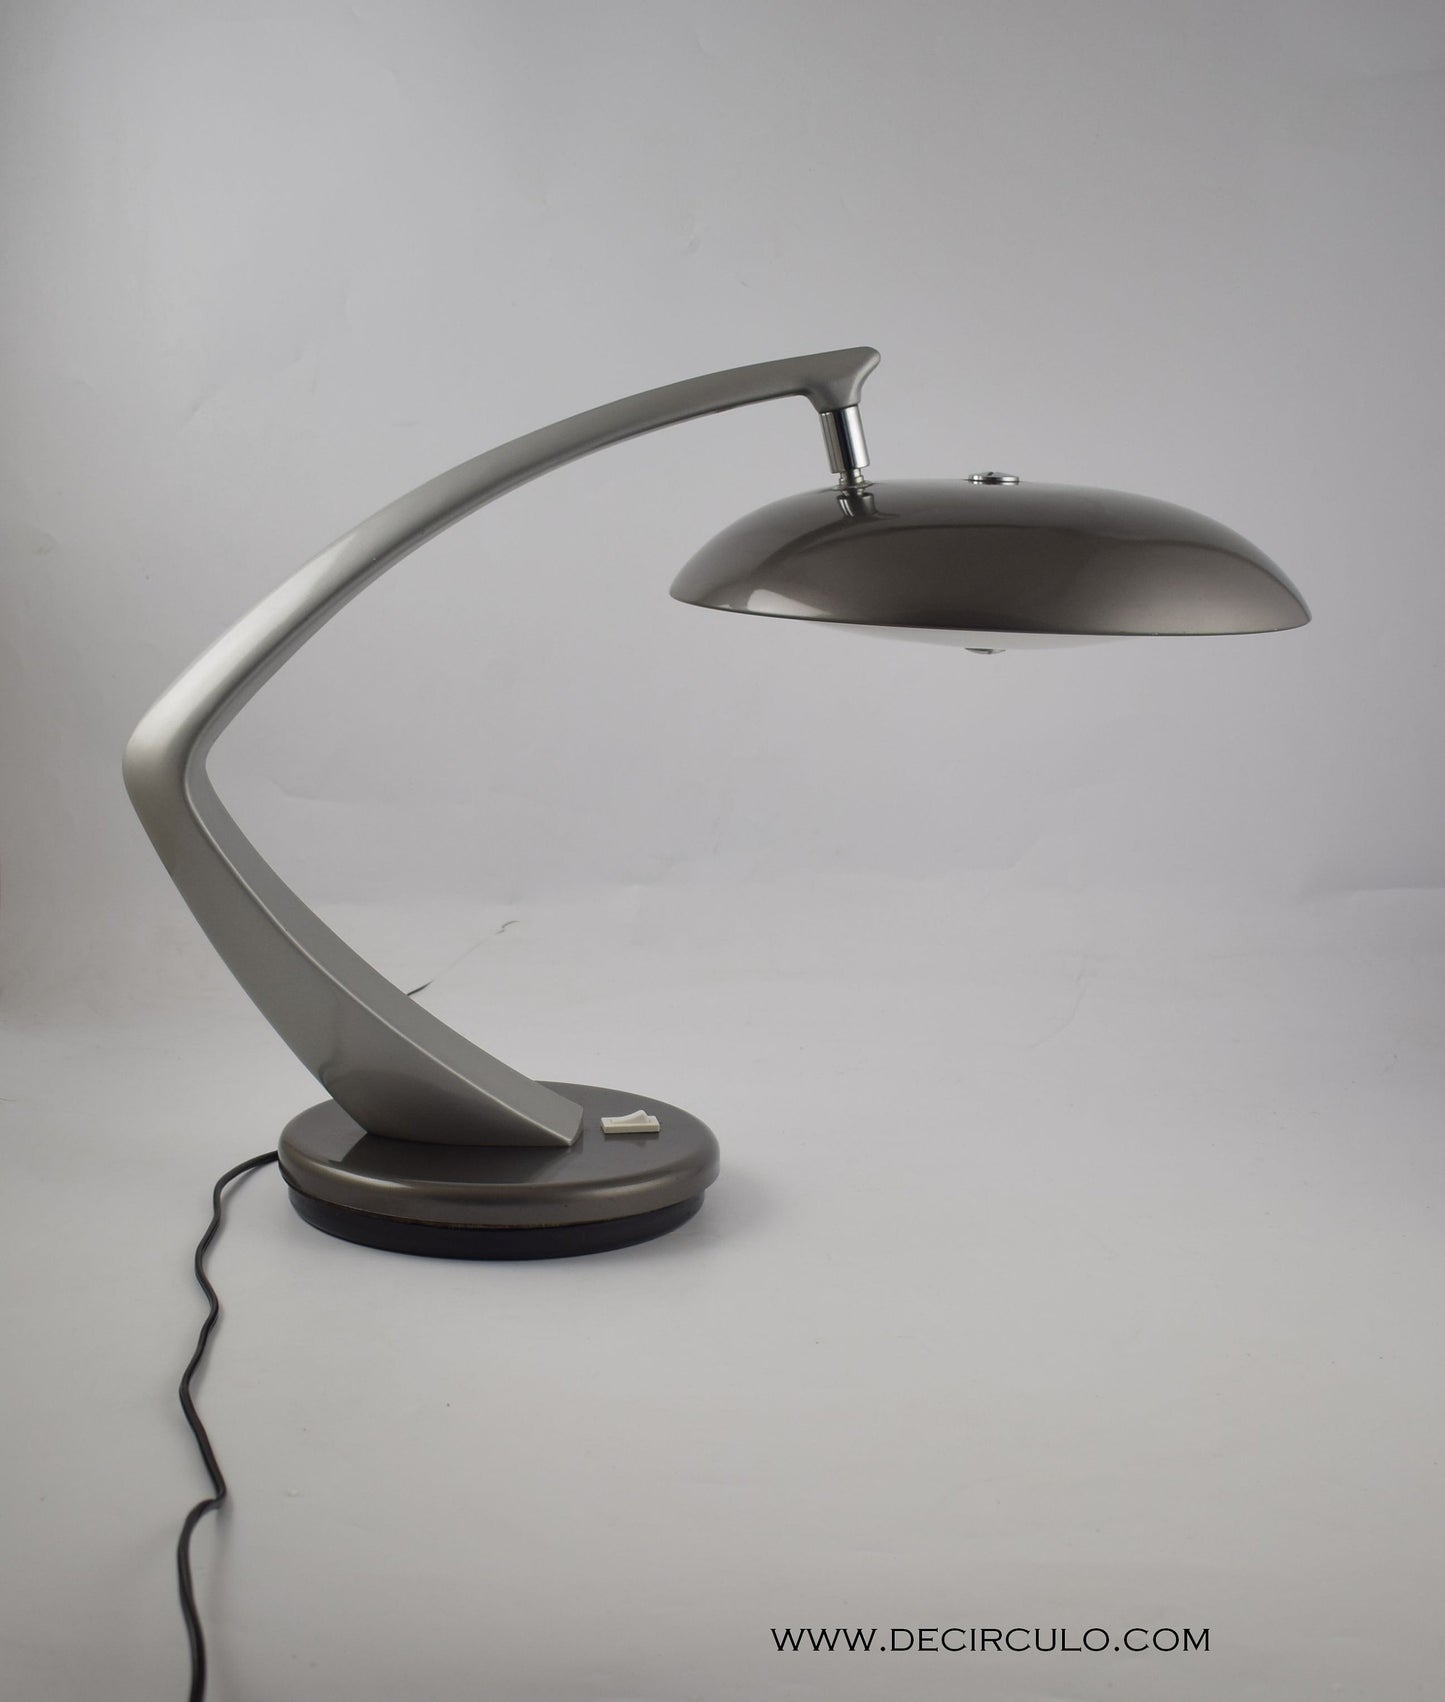 Fase Boomerang desk table lamp Madrid Spain. Beautiful light from the 1960s and early 1970s